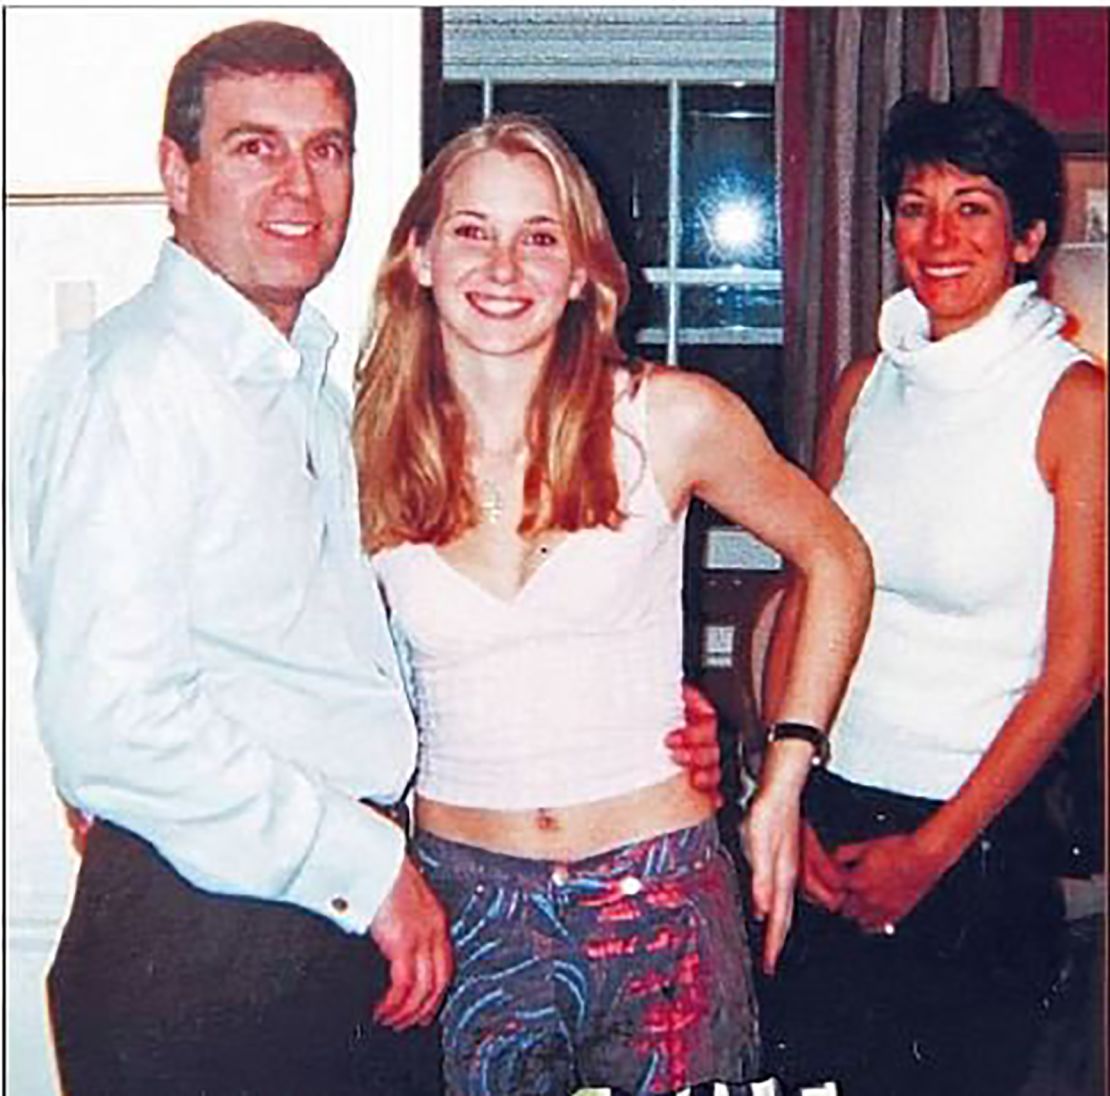 A photograph appearing to show Prince Andrew with Jeffrey Epstein's accuser Virginia Roberts Giuffre and, in the background, Ghislaine Maxwell.